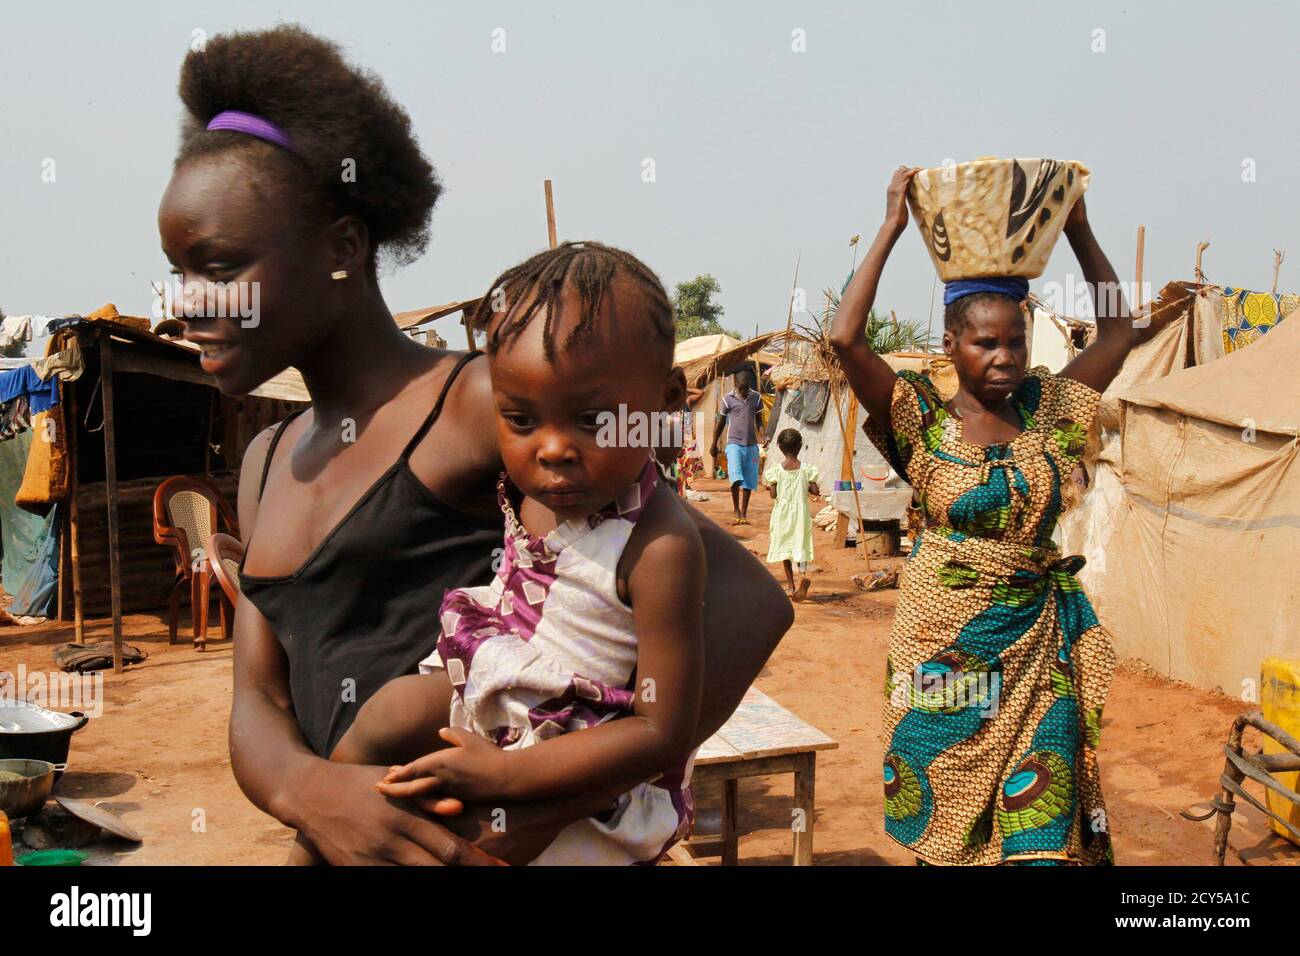 Central African Girl High Resolution Stock Photography and Images - Alamy